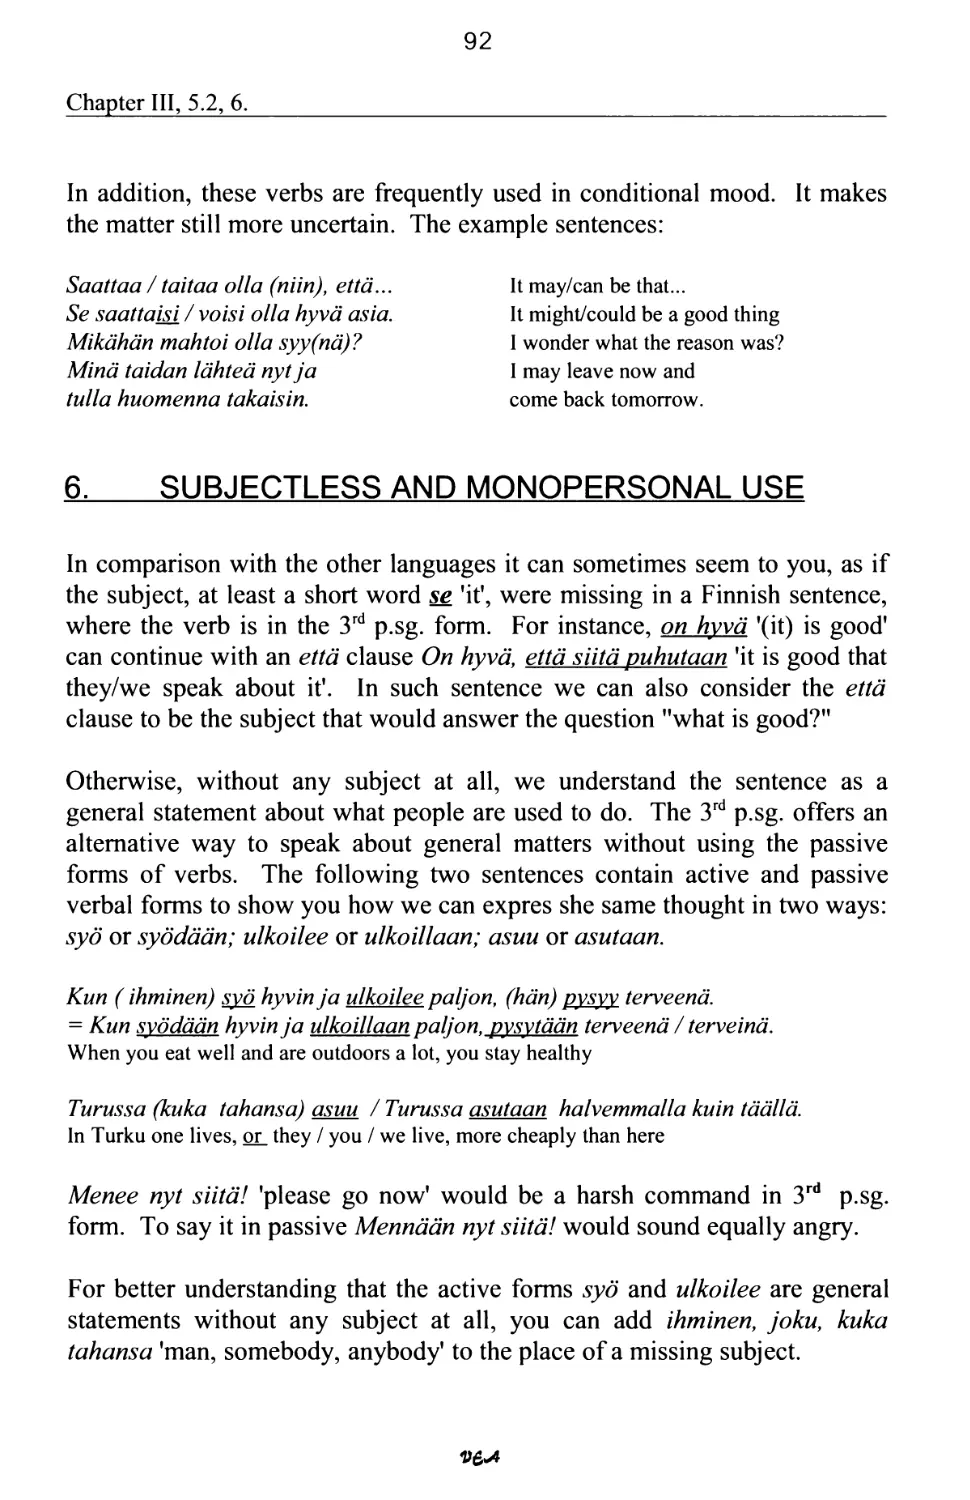 6. SUBJECTLESS AND MONOPERSONAL USE